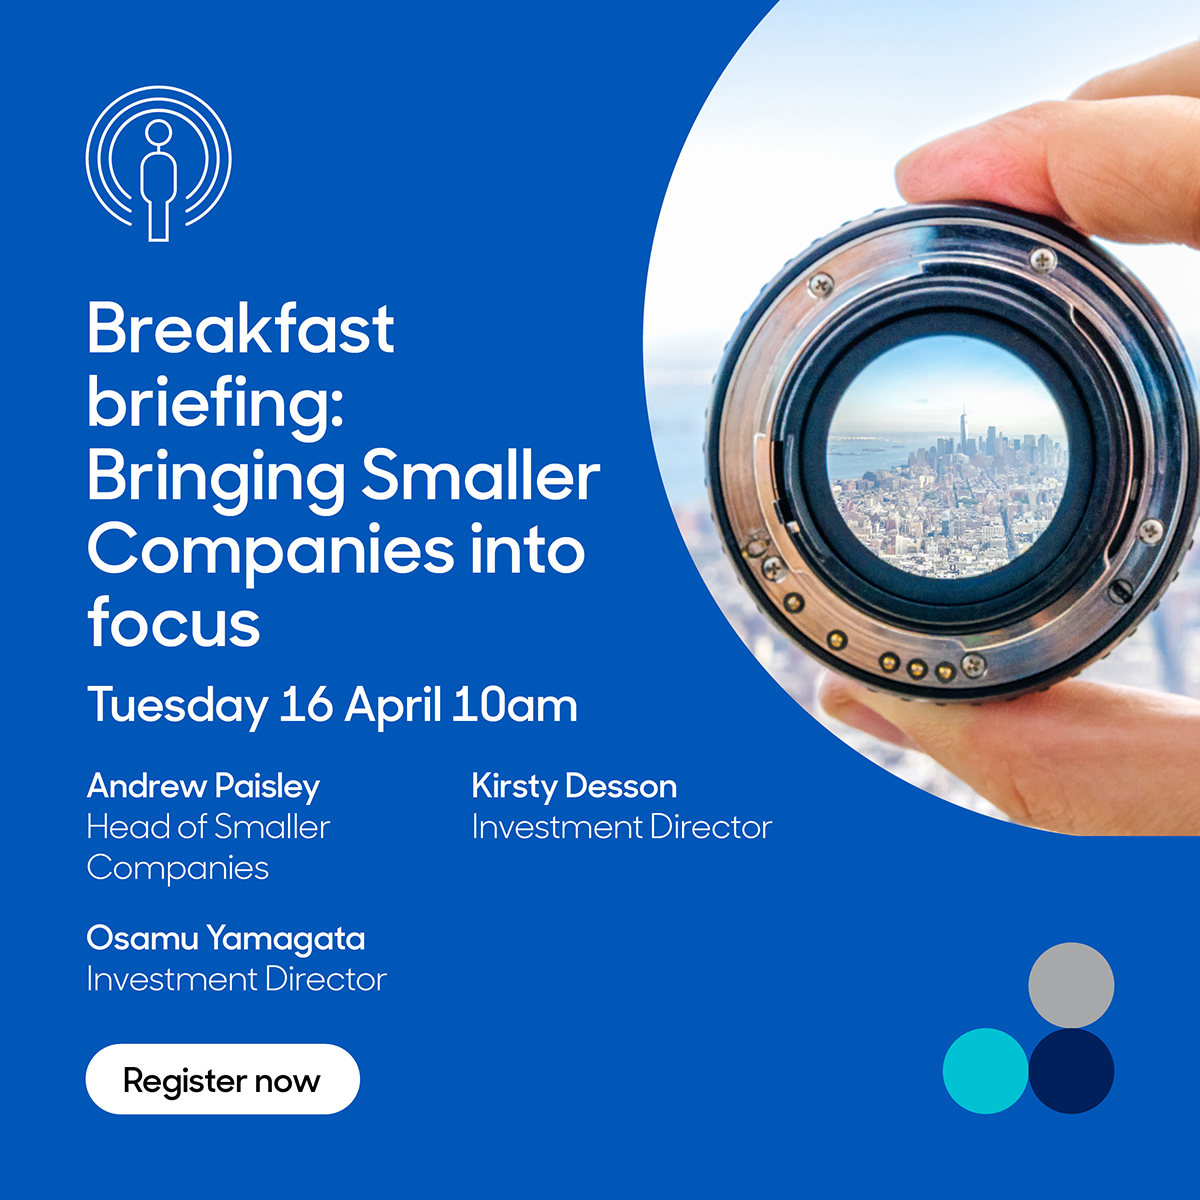 Join us, where we will discuss small cap and answer the questions that matter to your clients. Register here. Professional Investors Only. Capital at risk. #SmallerCompanies ow.ly/3mXF50R6naX